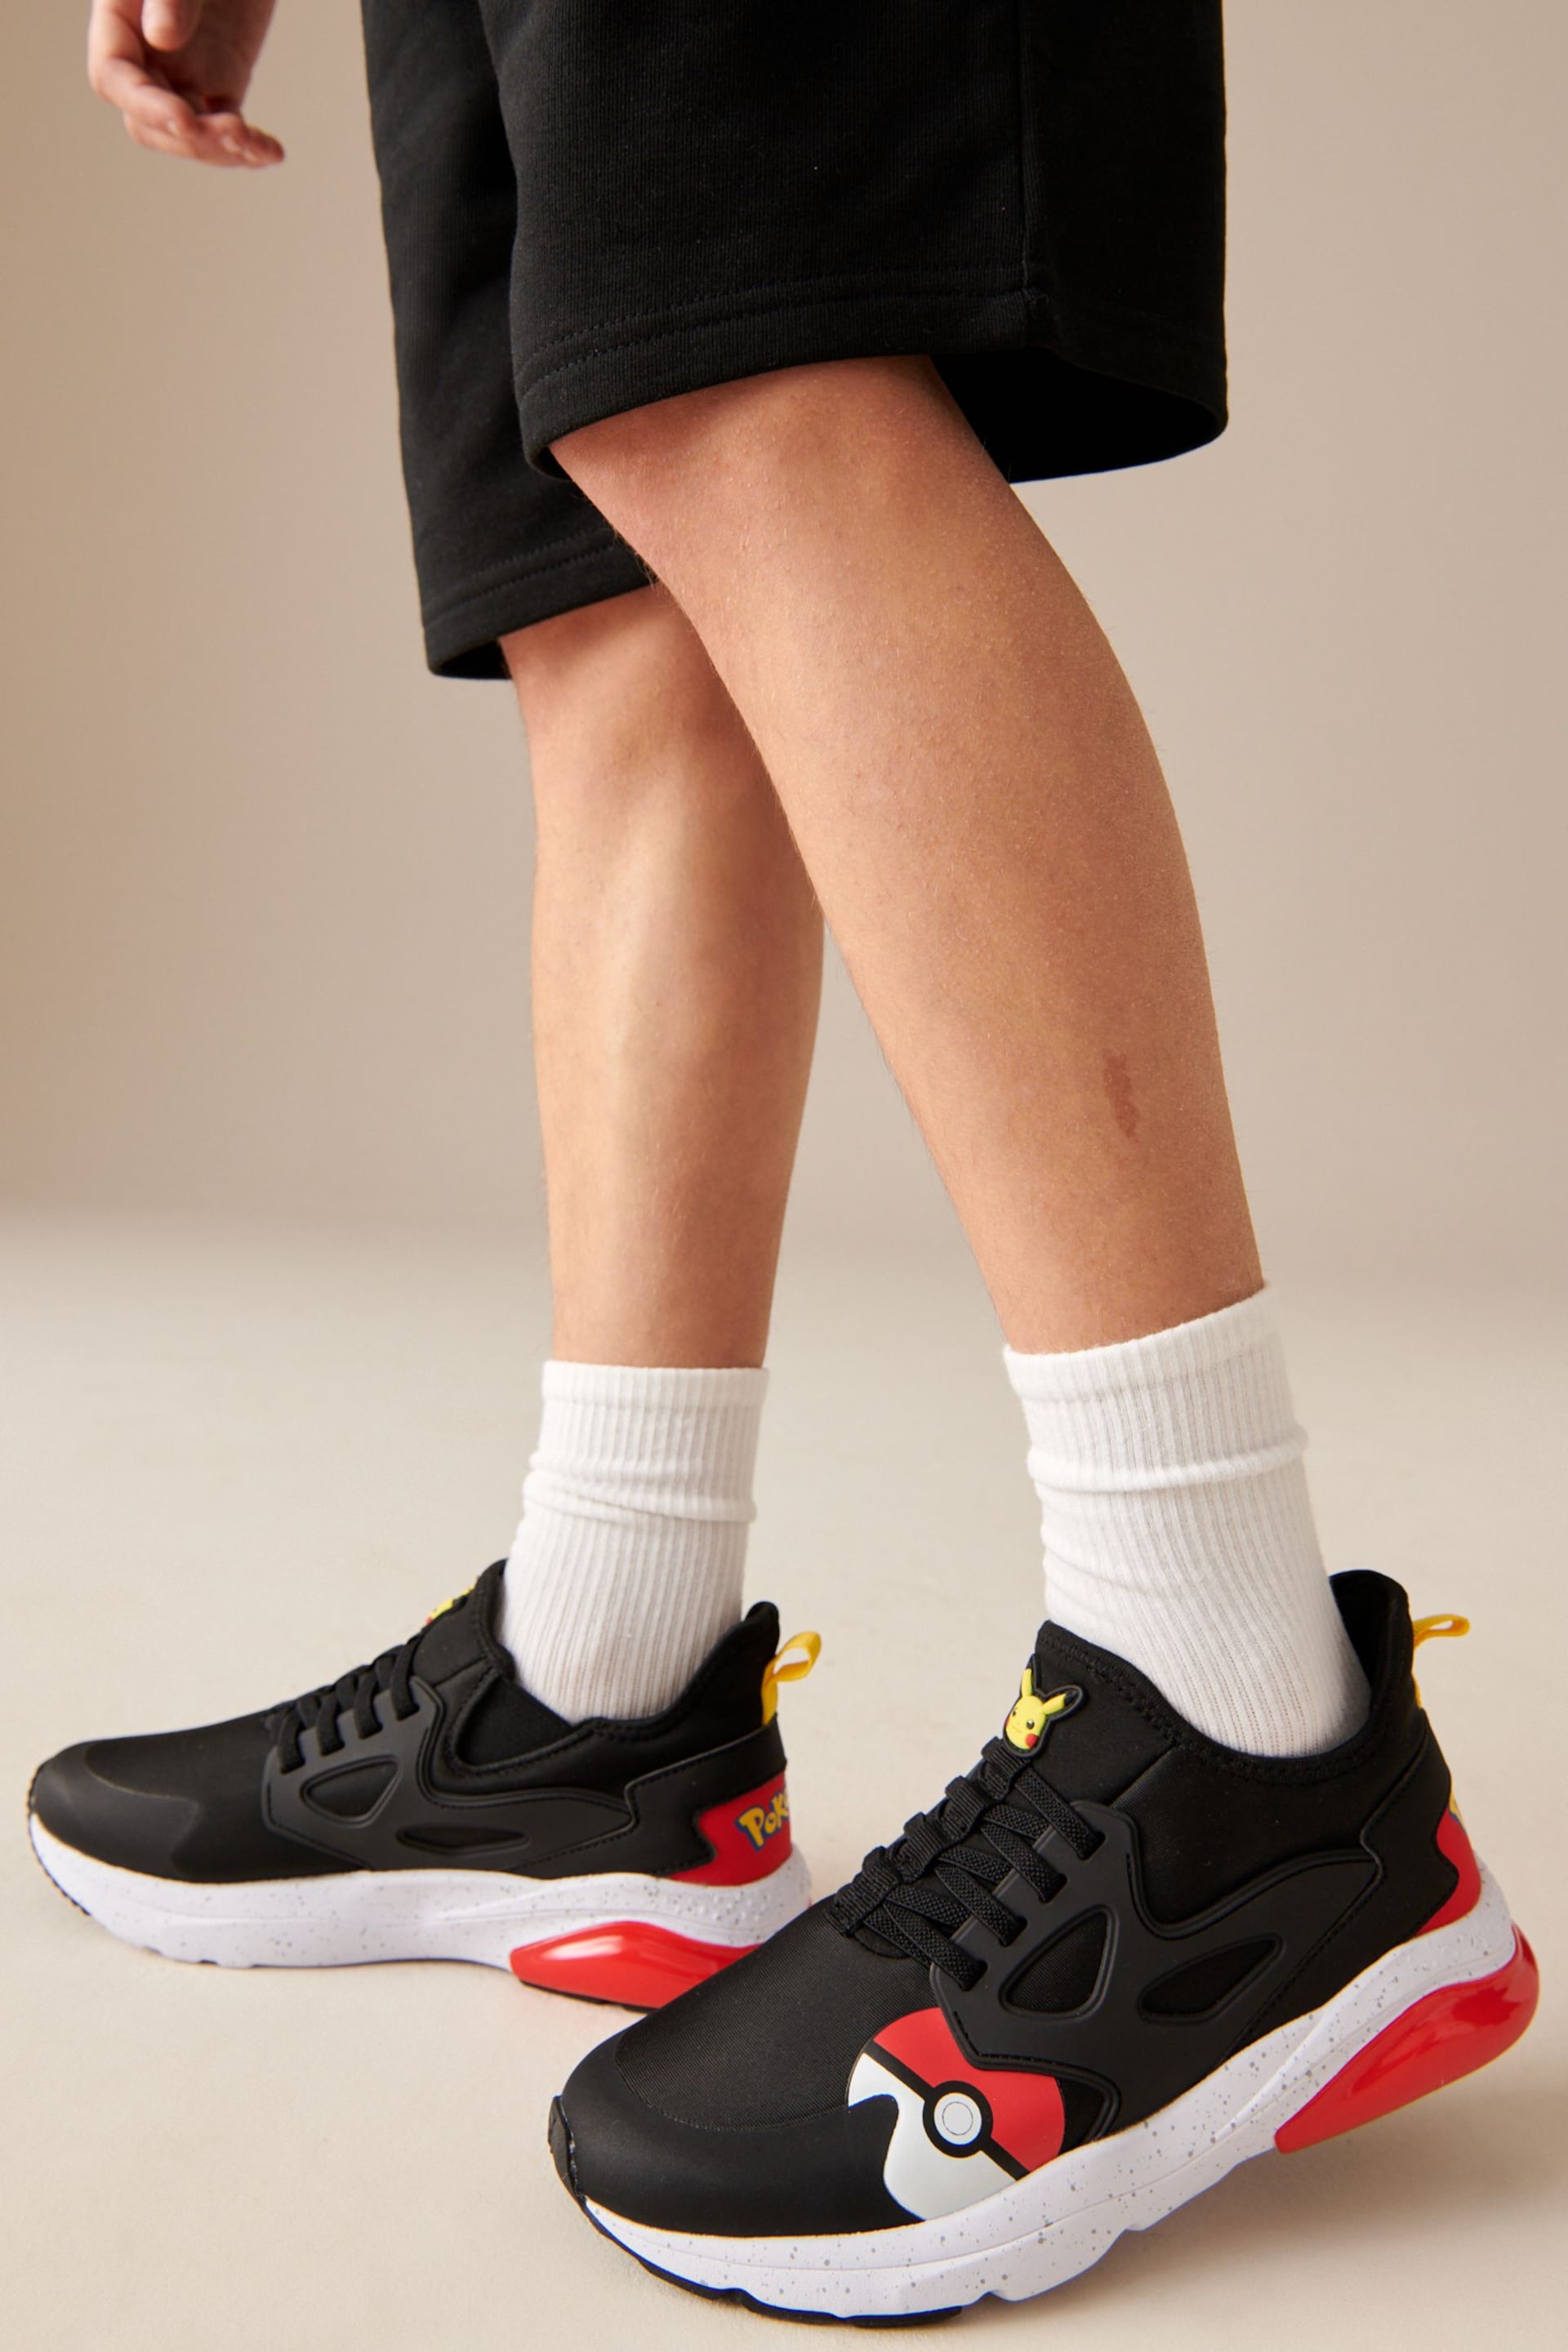 Black/Red Pokemon Elastic Lace Trainers - Image 1 of 6